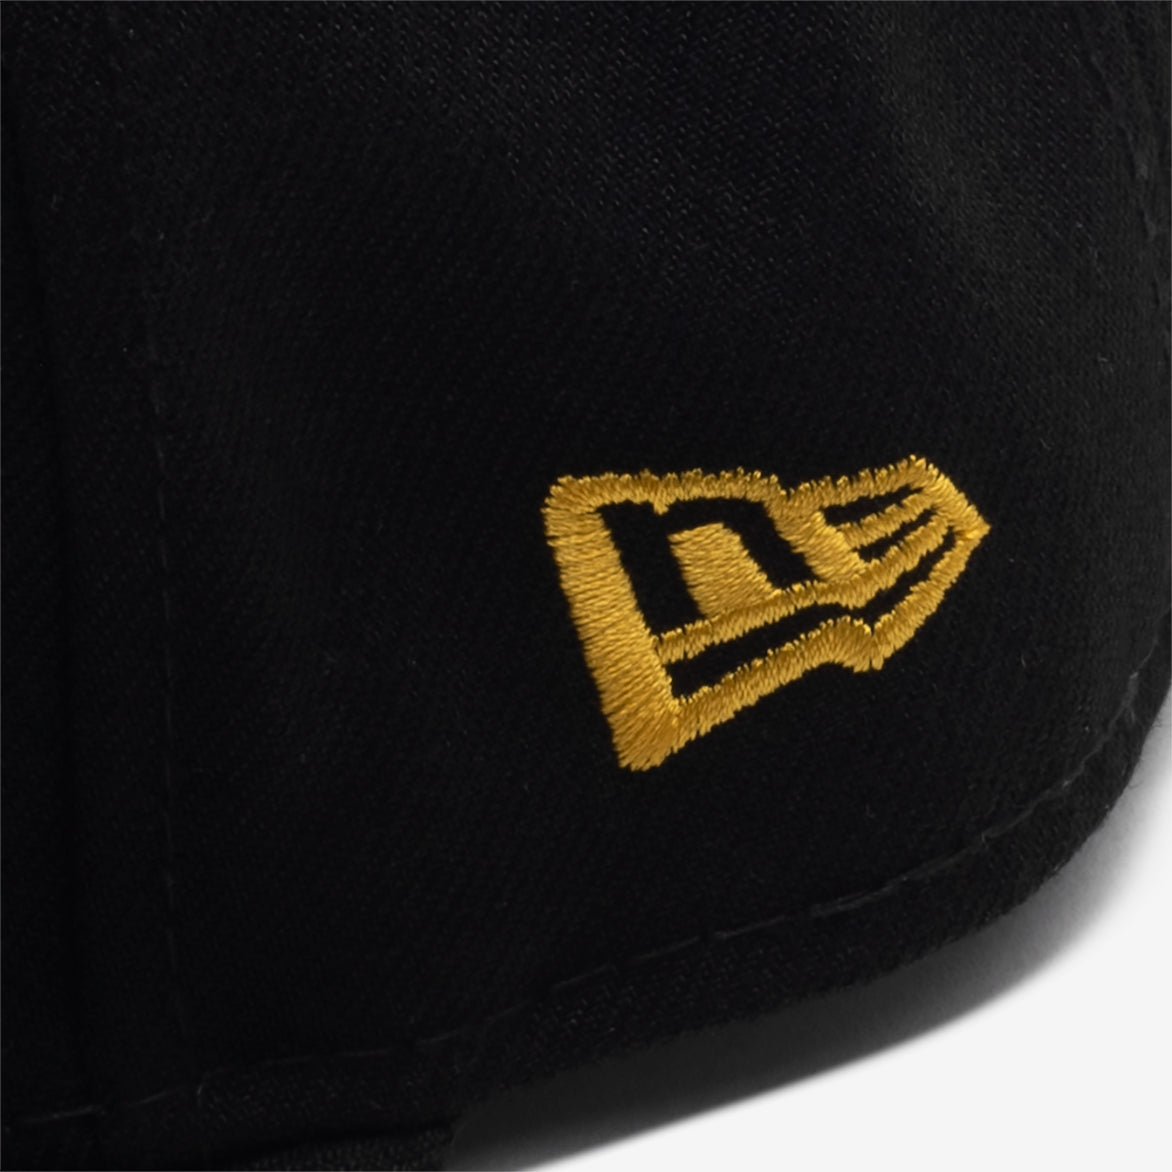 JUST DON X NEW ERA NBA 59FIFTY FITTED "LAKERS" - BLACK